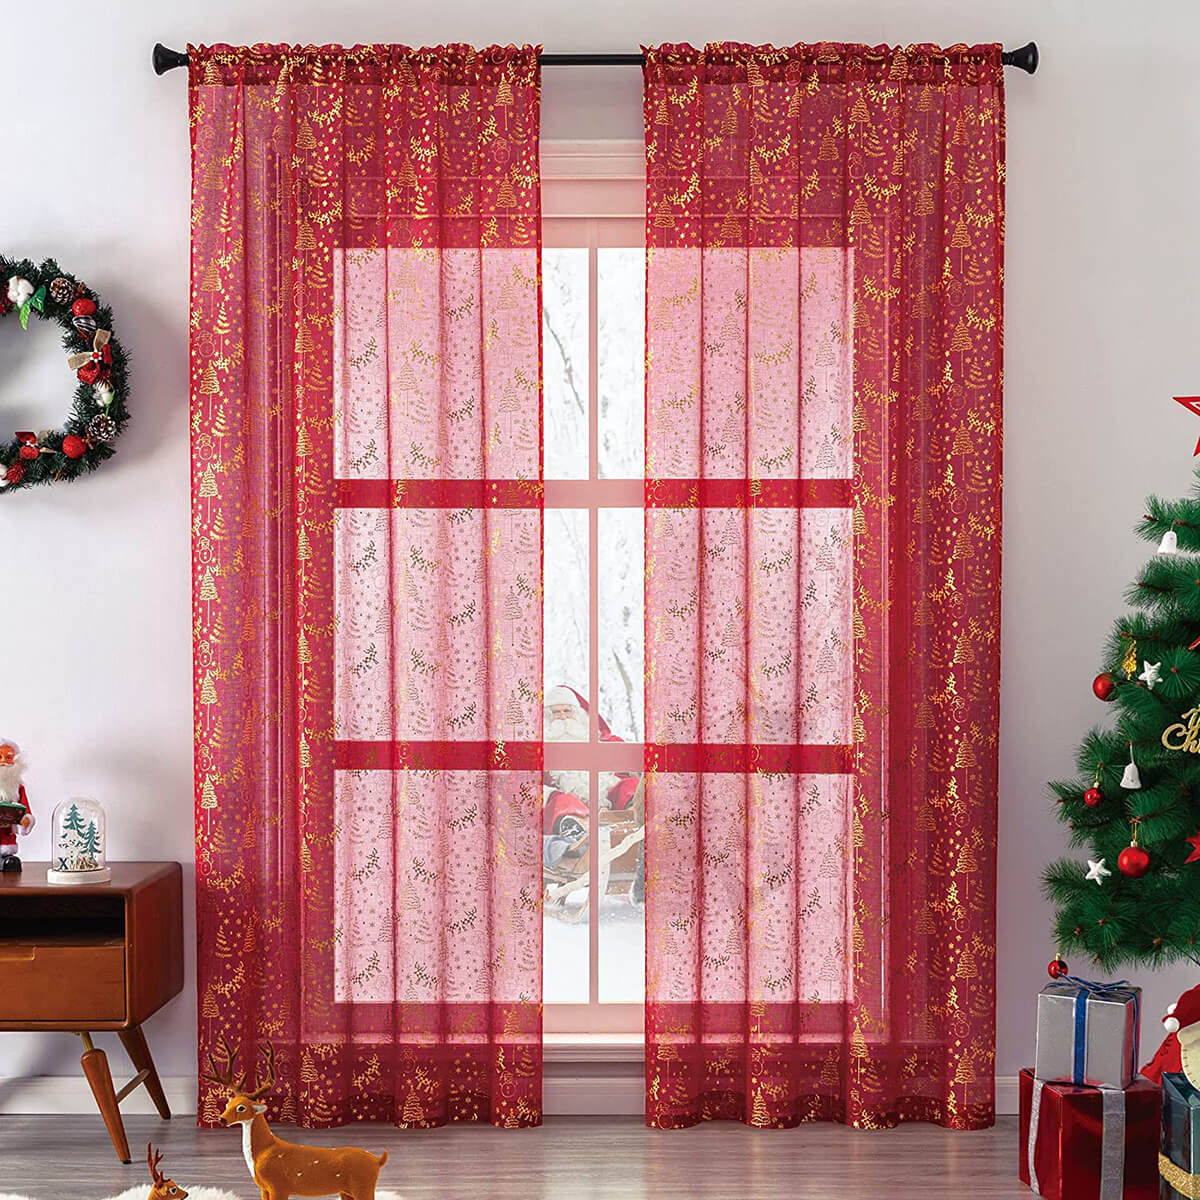 Sheer Red and Gold Christmas Curtain Design